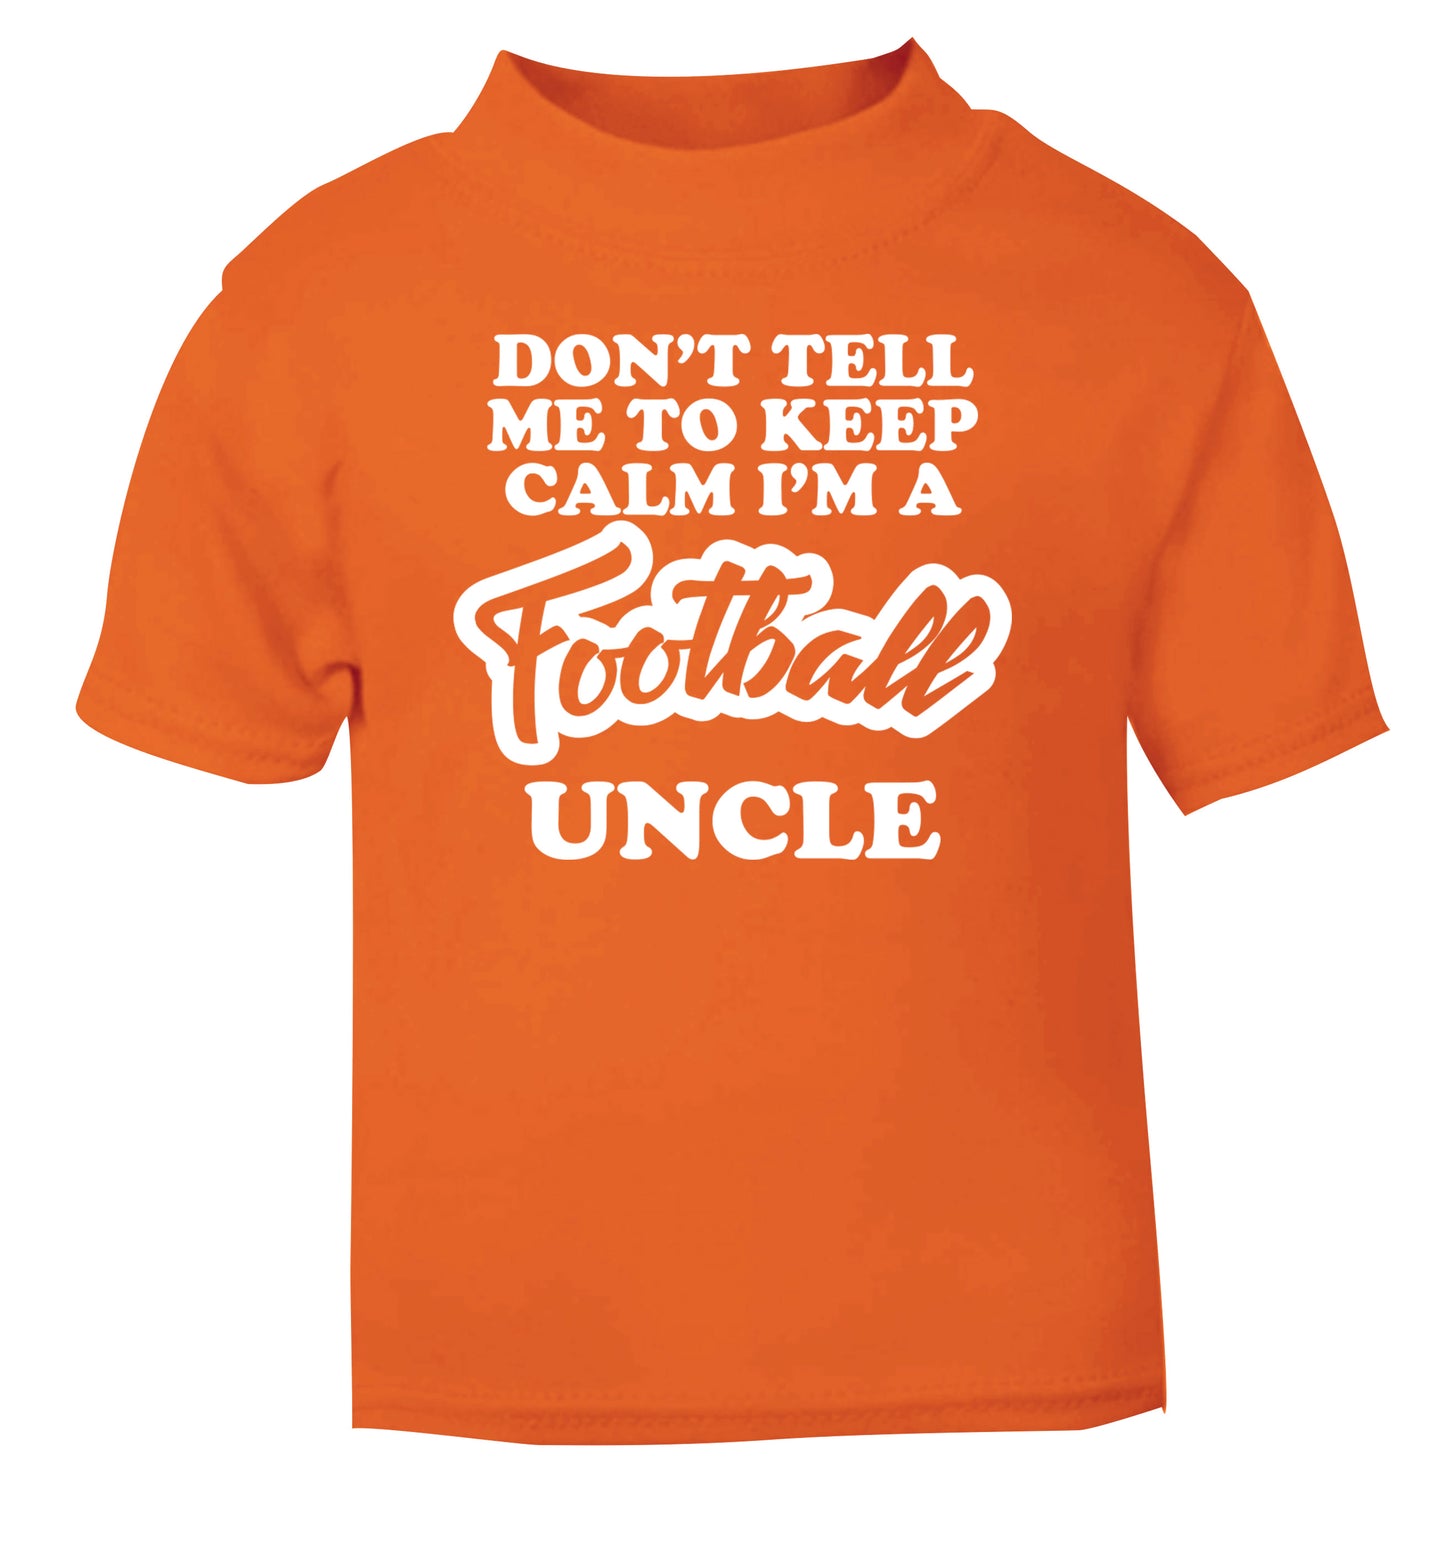 Don't tell me to keep calm I'm a football uncle orange Baby Toddler Tshirt 2 Years